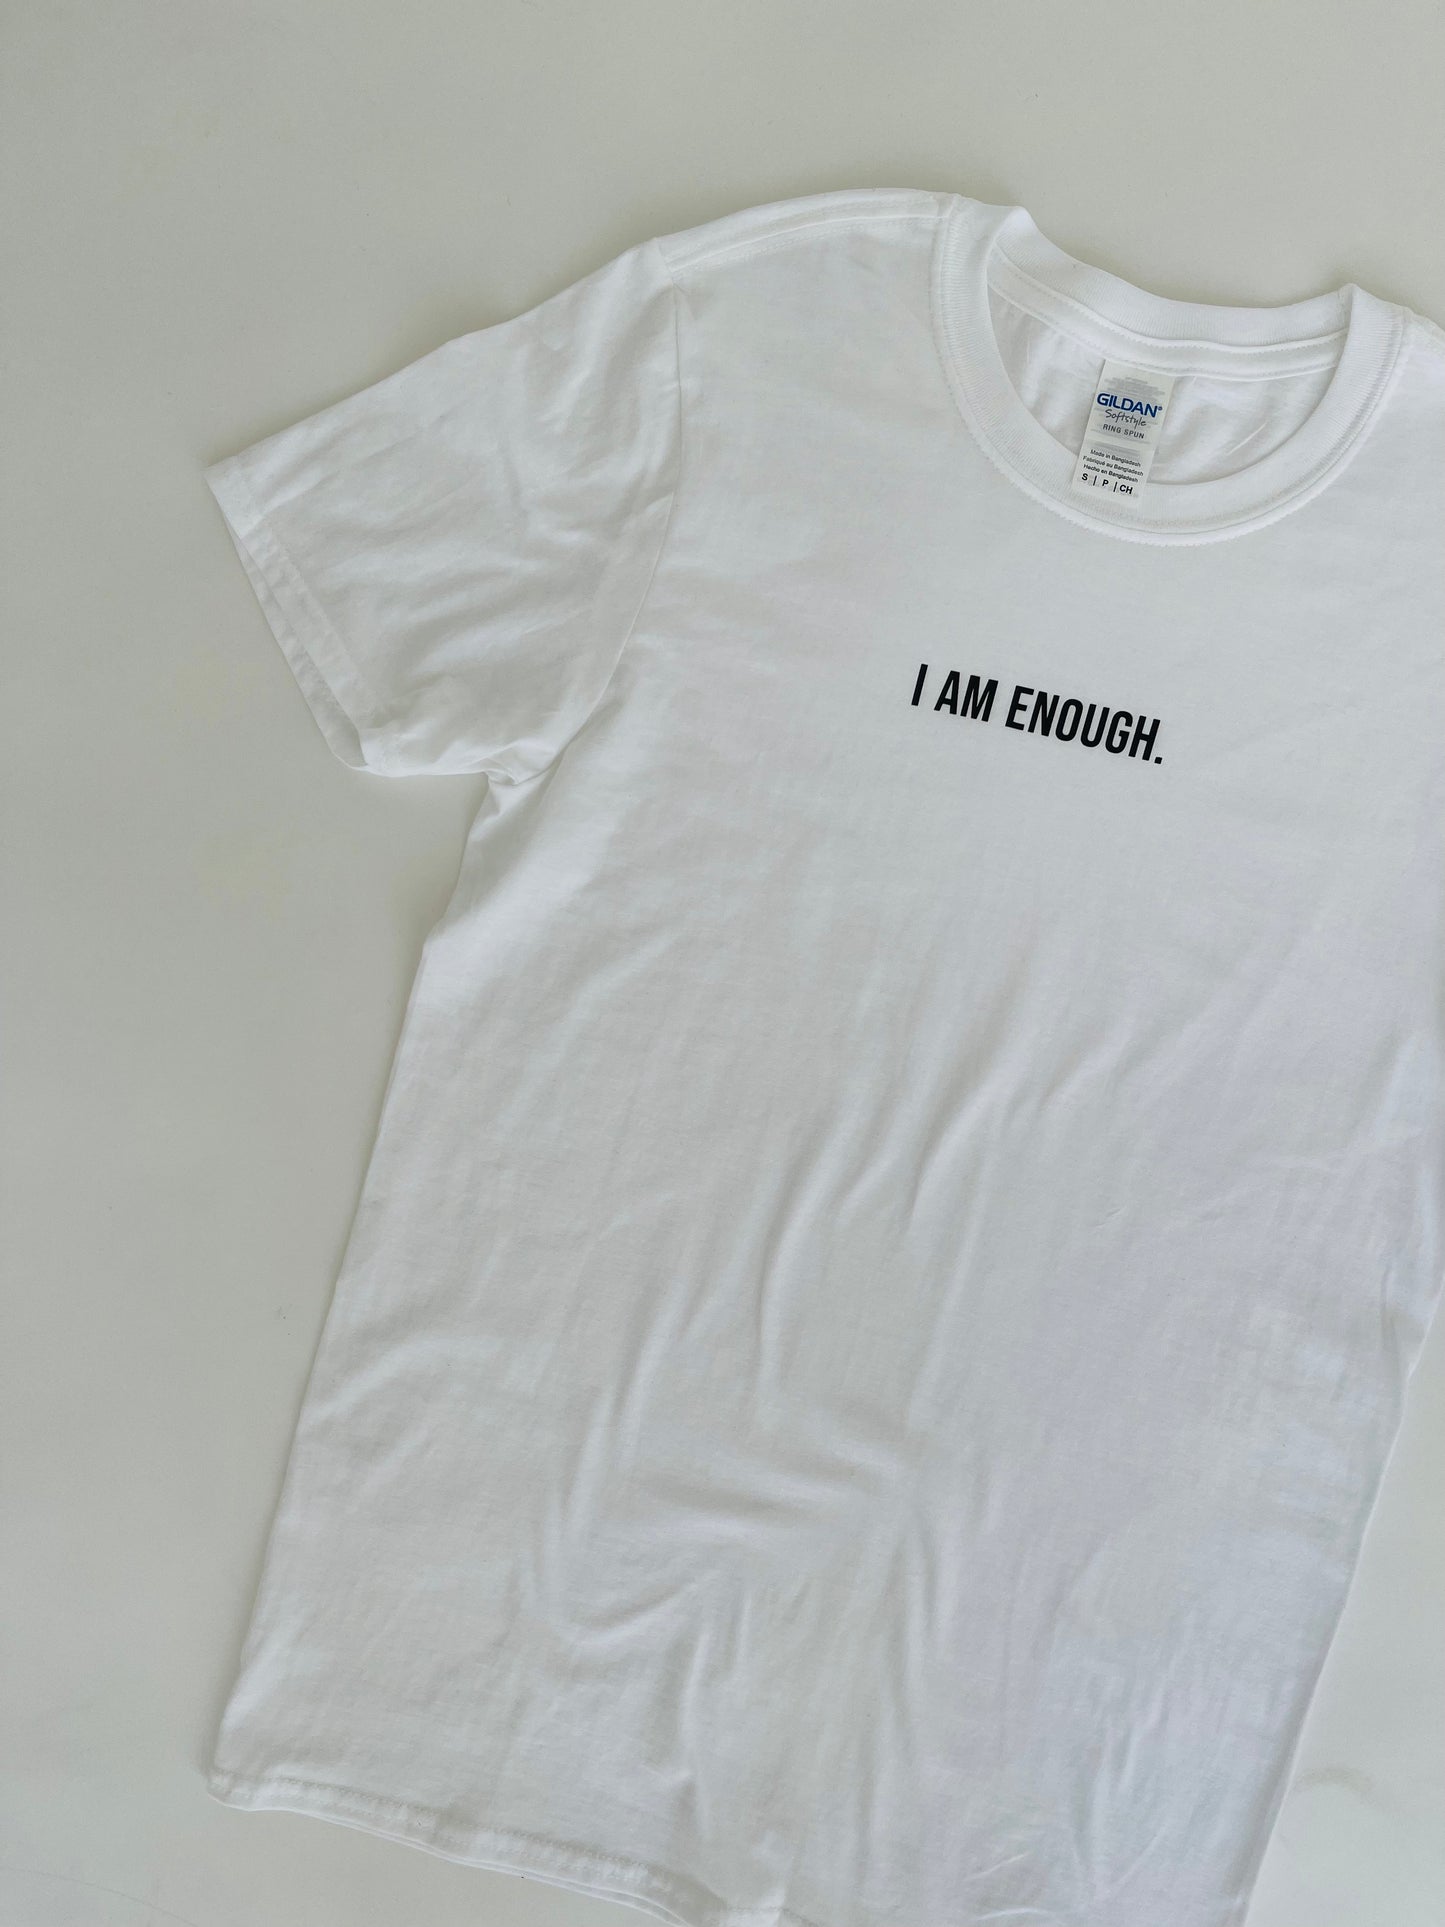 I AM ENOUGH TEE (youth)